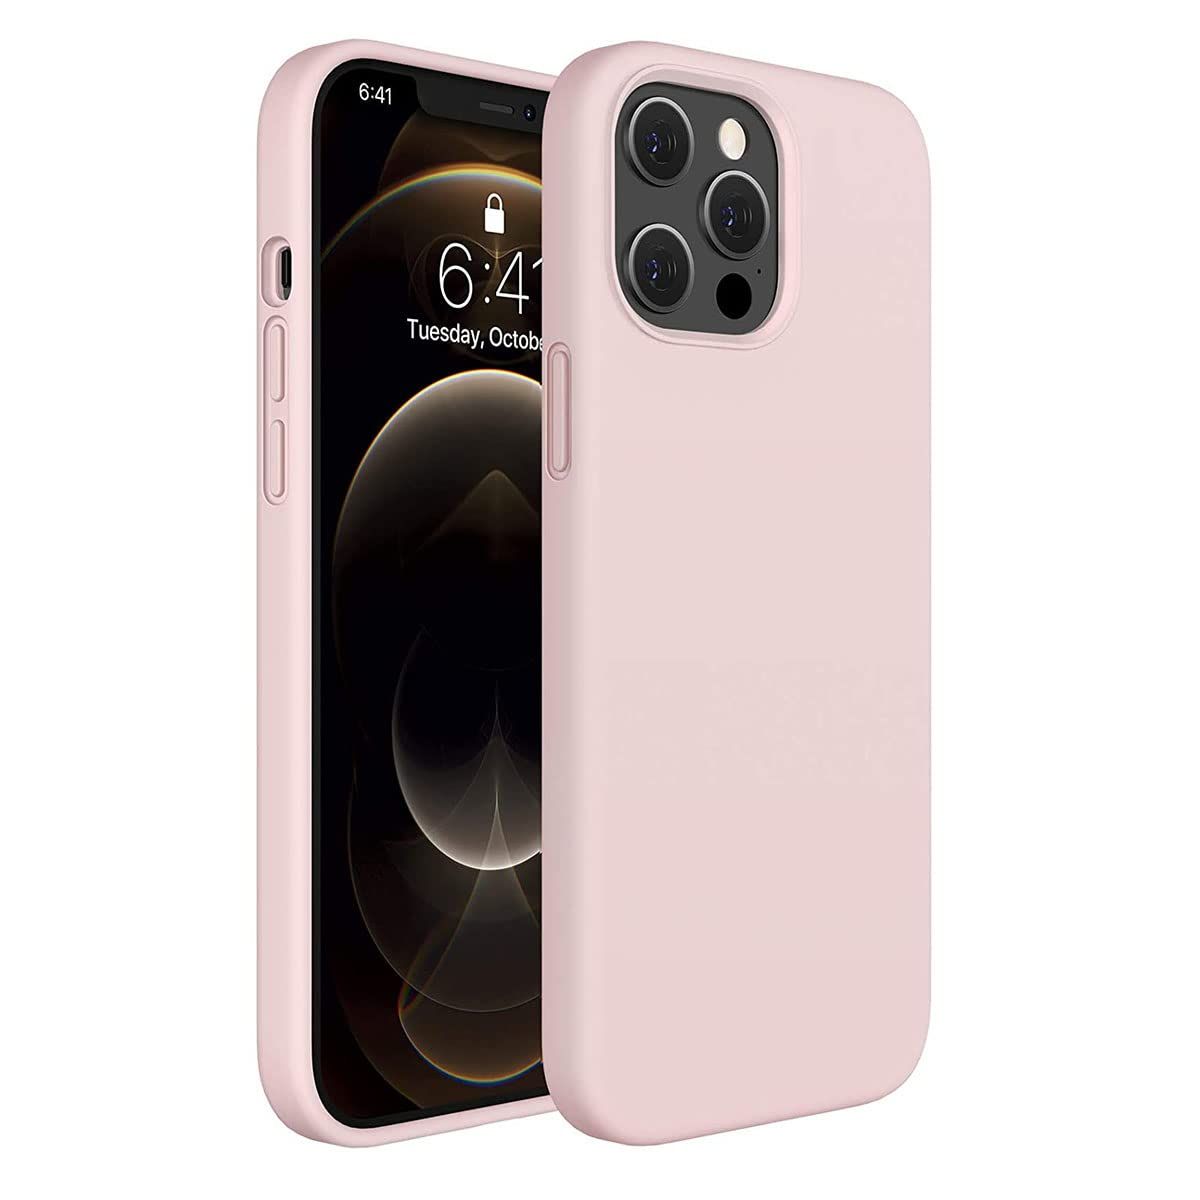 LIRAMARK Liquid Silicone Soft Back Cover Case for Apple iPhone 12 / Apple iPhone 12 Pro (6.1 inch) (Pink)